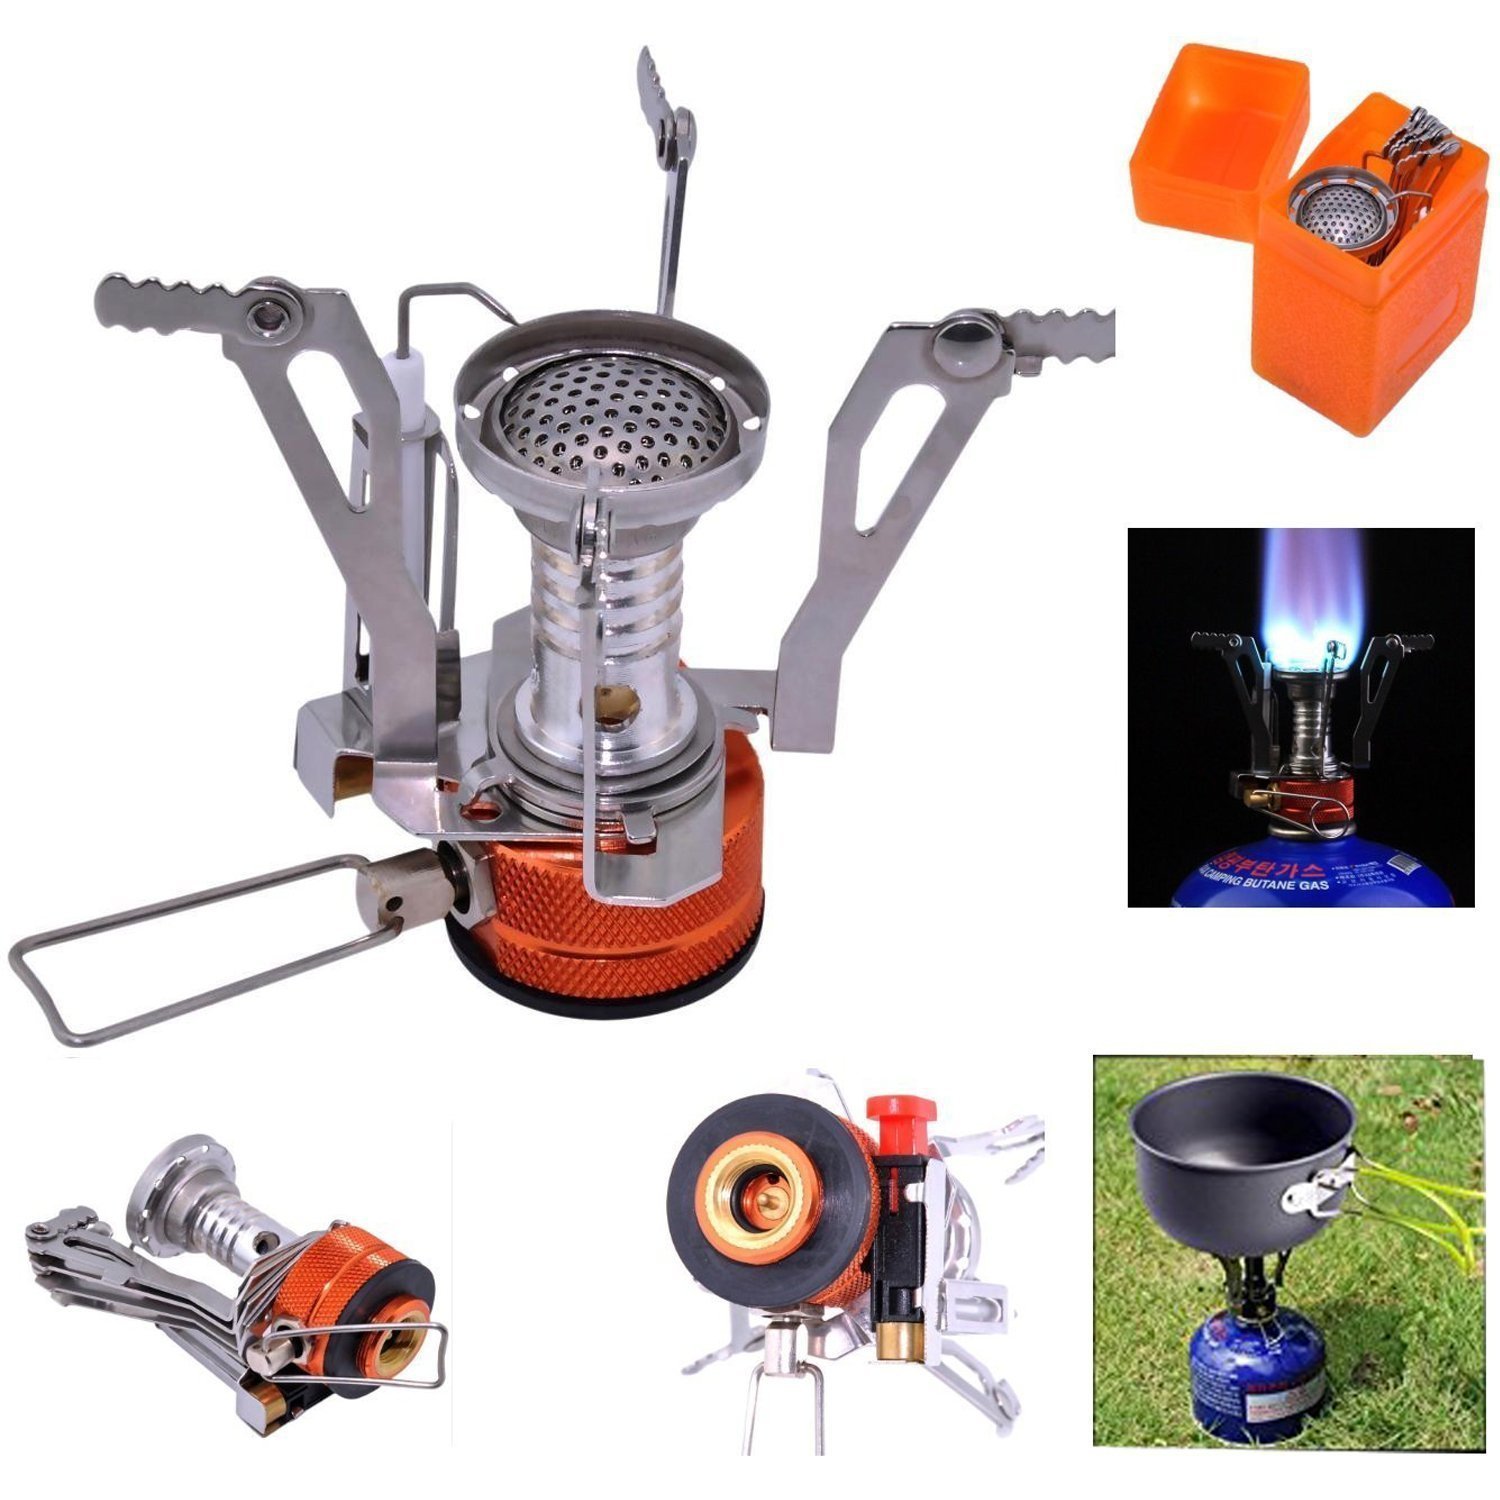 GL Portable Light Outdoor Camping Cookware Sets Gas Stove with Foldable Tableware Pan Dishwashing Sponge Hiking Picnic Tool 6